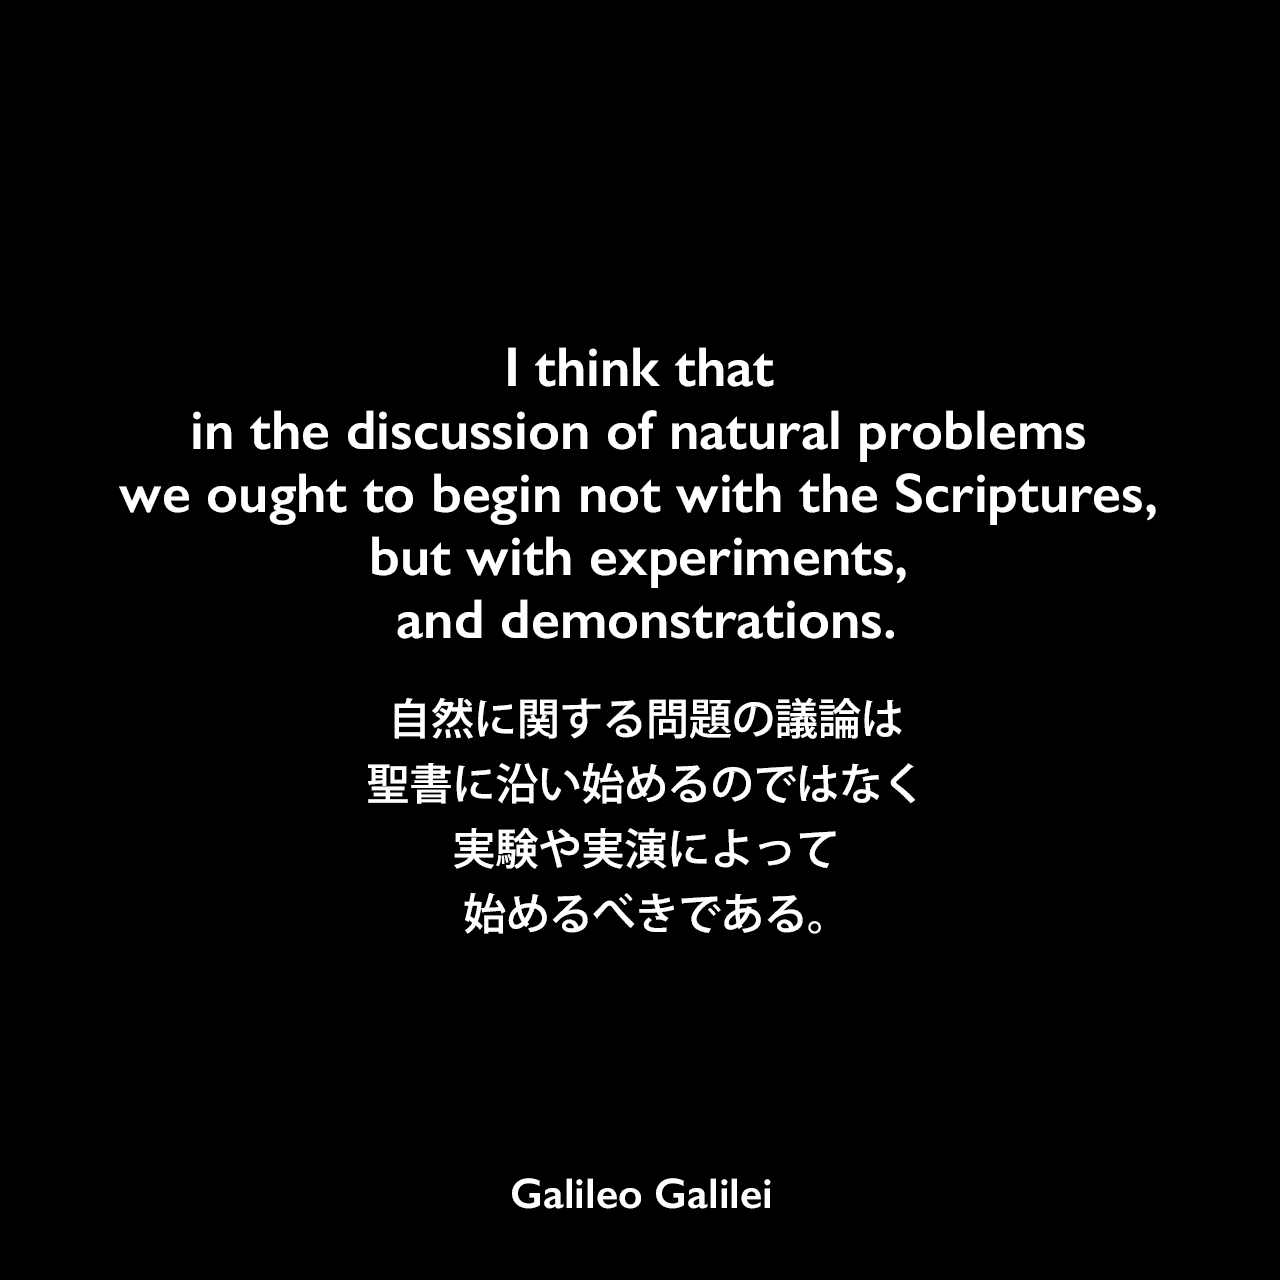 I think that in the discussion of natural problems we ought to begin not with the Scriptures, but with experiments, and demonstrations.自然に関する問題の議論は、聖書に沿い始めるのではなく、実験や実演によって始めるべきである。Galileo Galilei